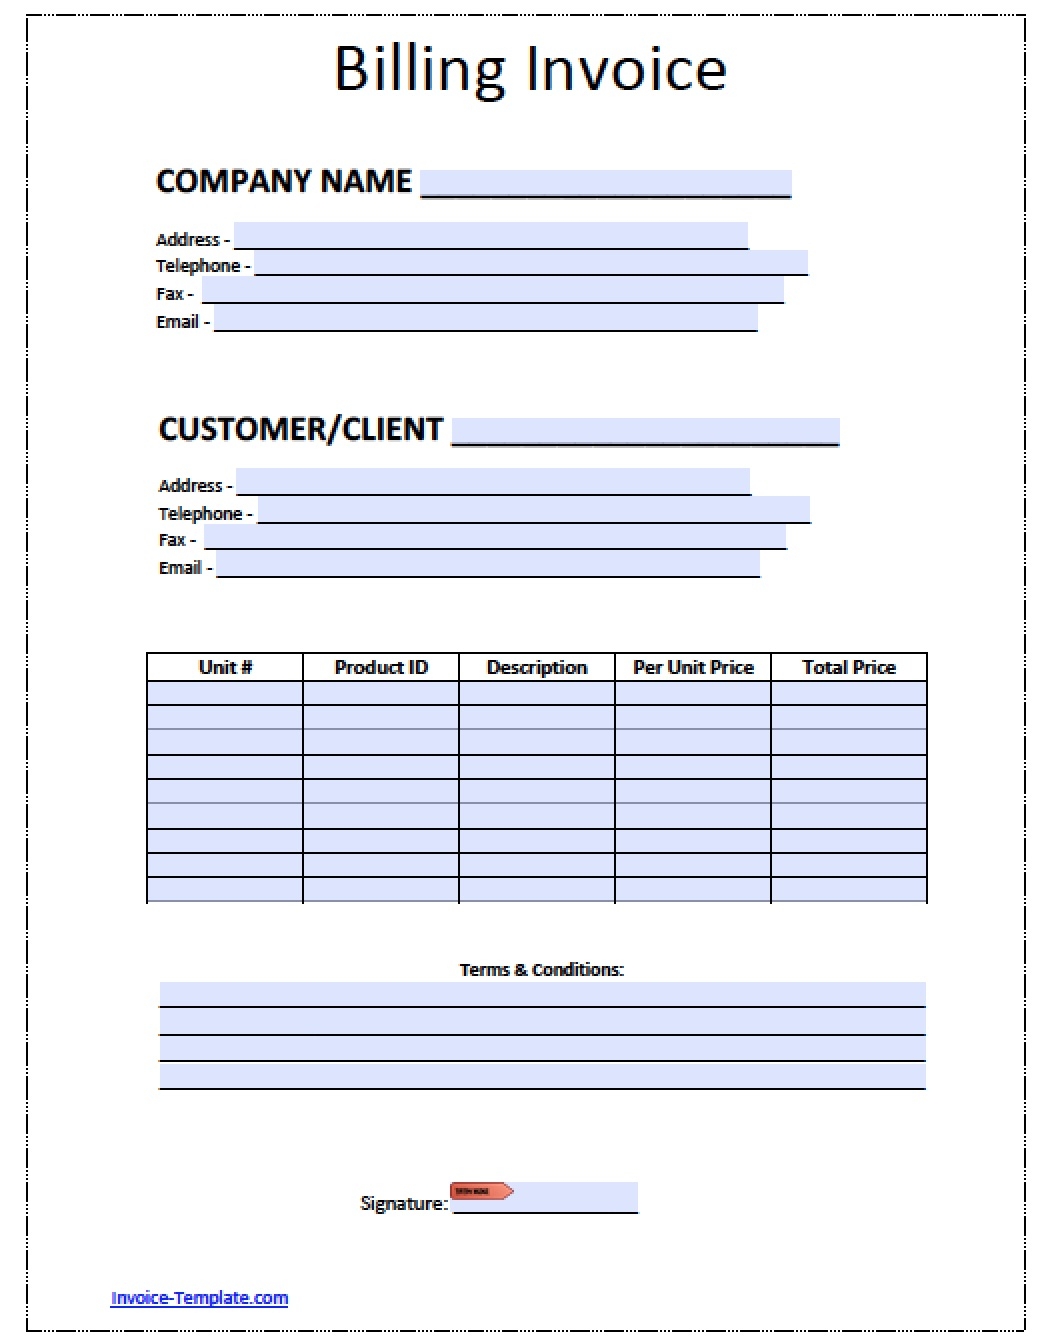 free blank invoice templates in pdf word amp excel billing invoice template pdf